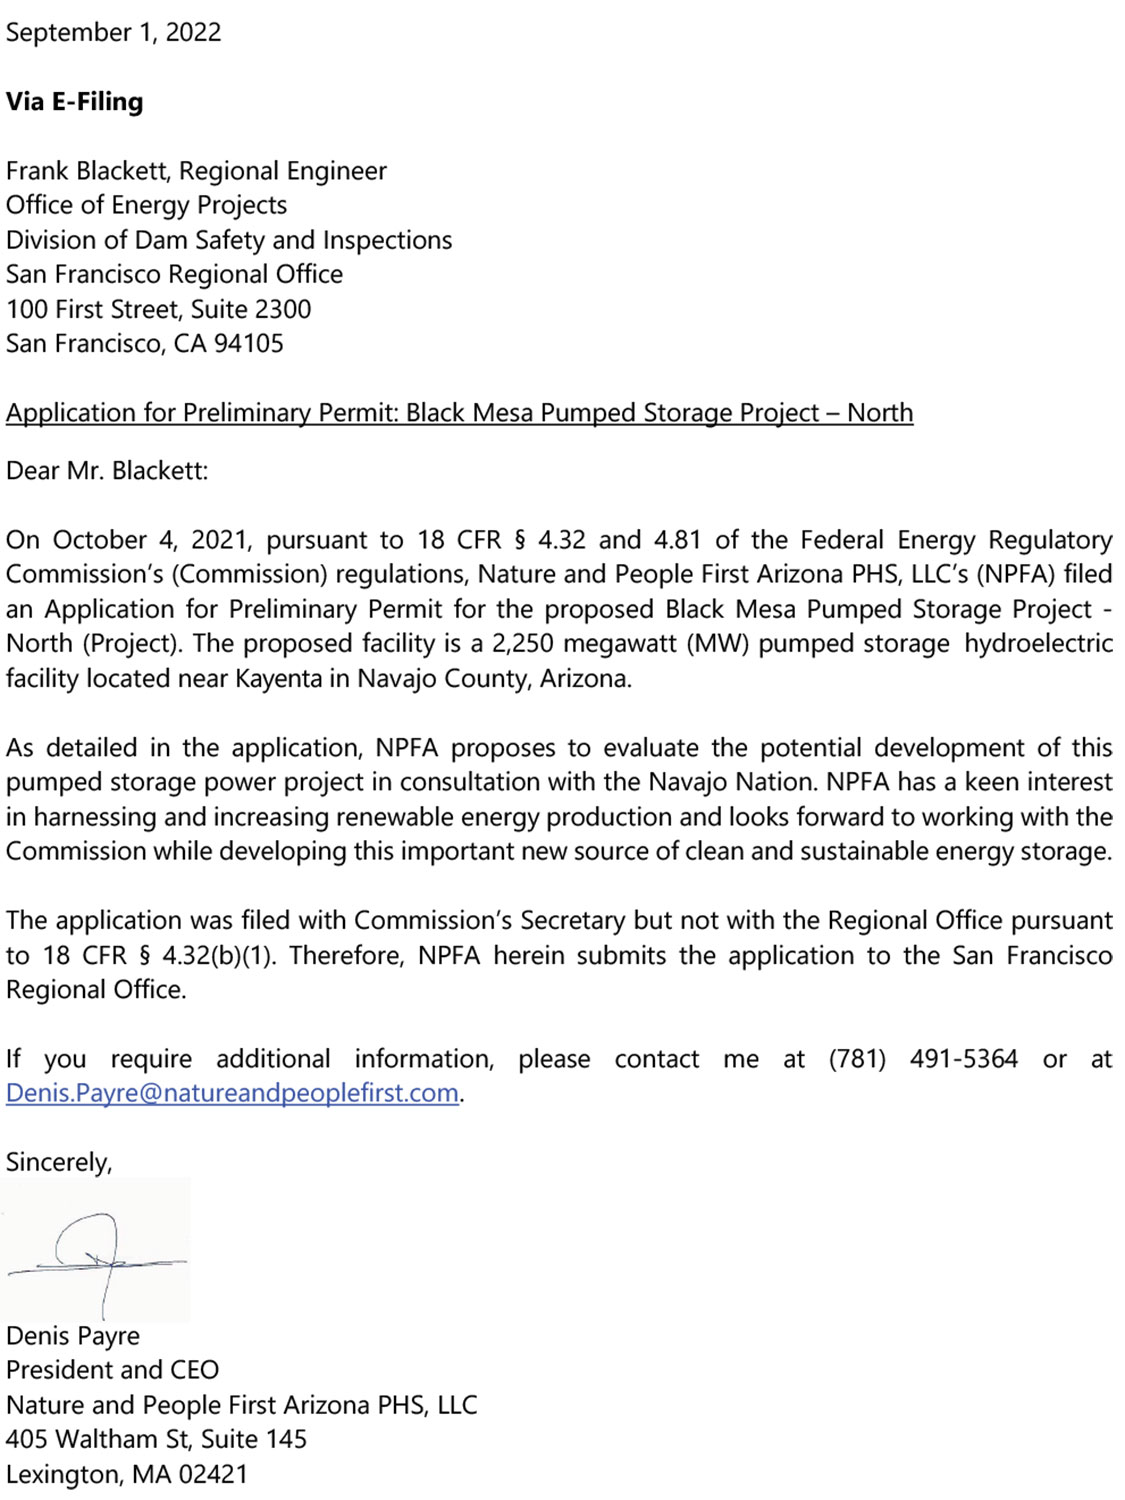 View the application for Black Mesa North